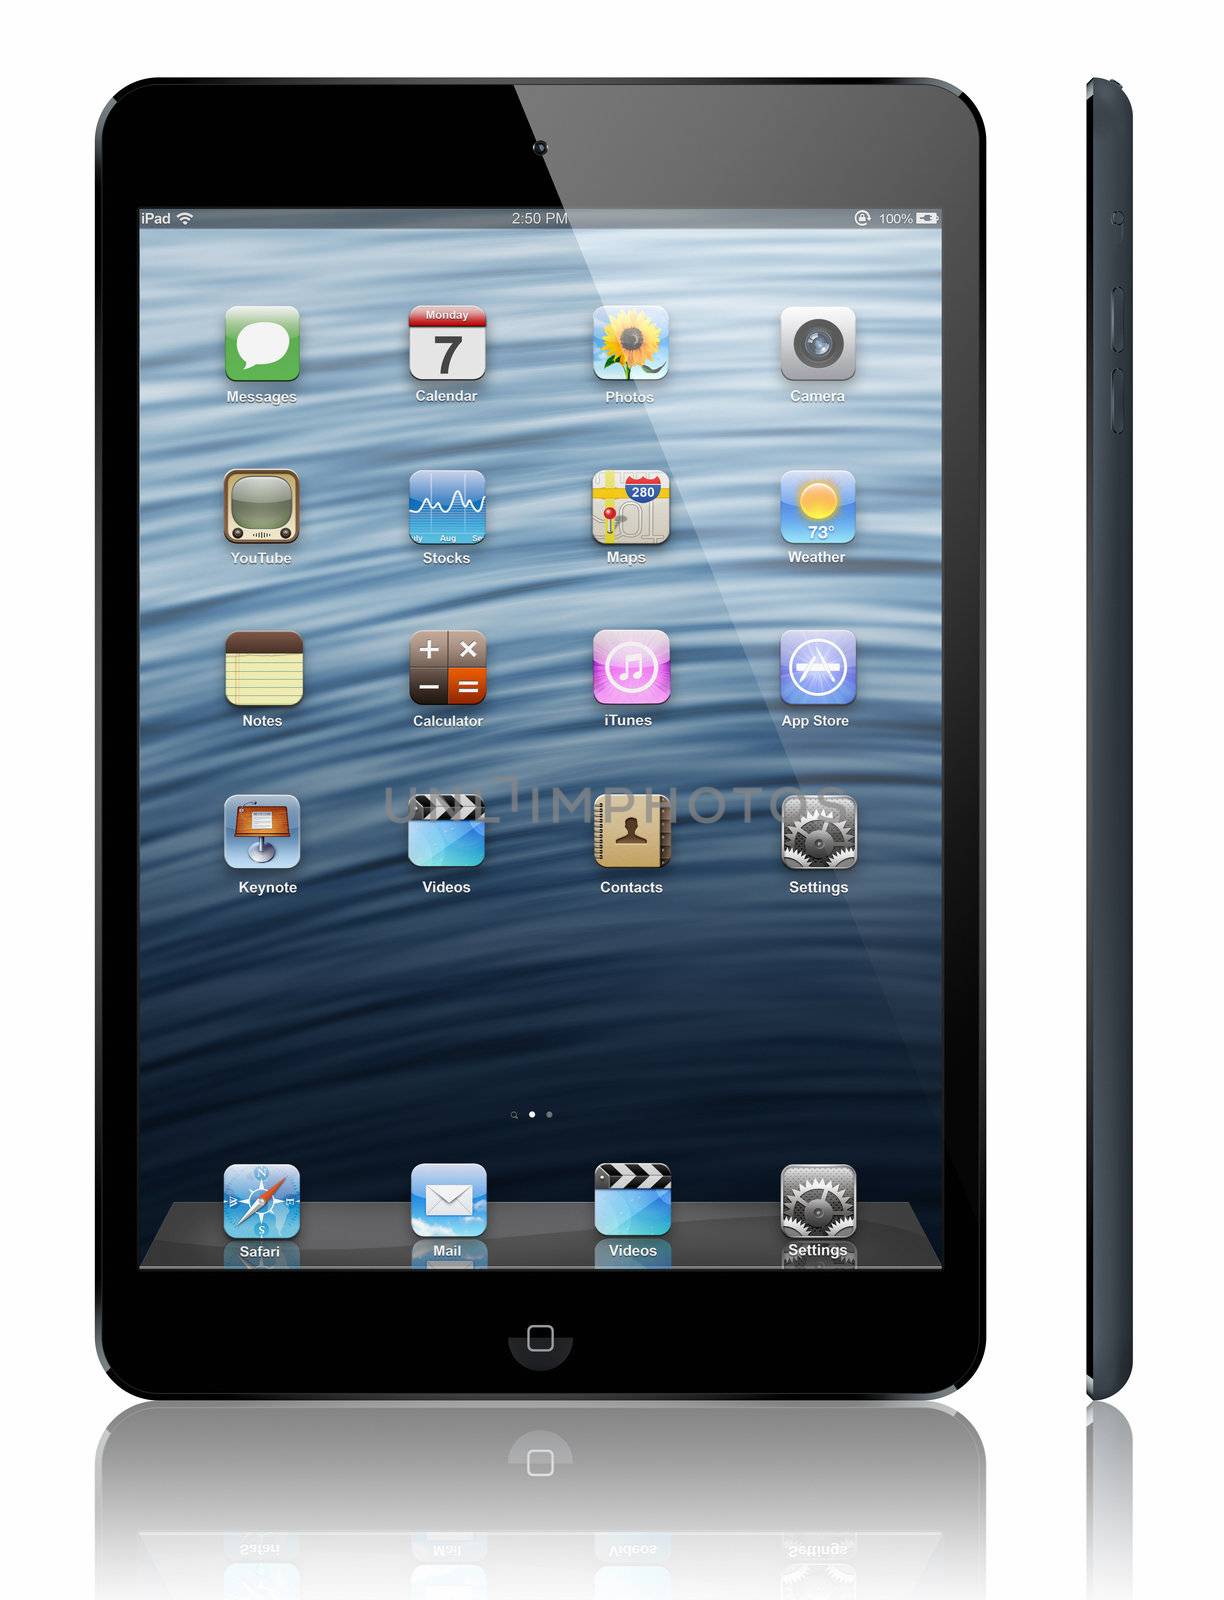 Galati, Romania - October 23, 2012 - Apple  today introduced iPad  mini, a completely new iPad design that is 23 percent thinner and 53 percent lighter than the third generation iPad. 